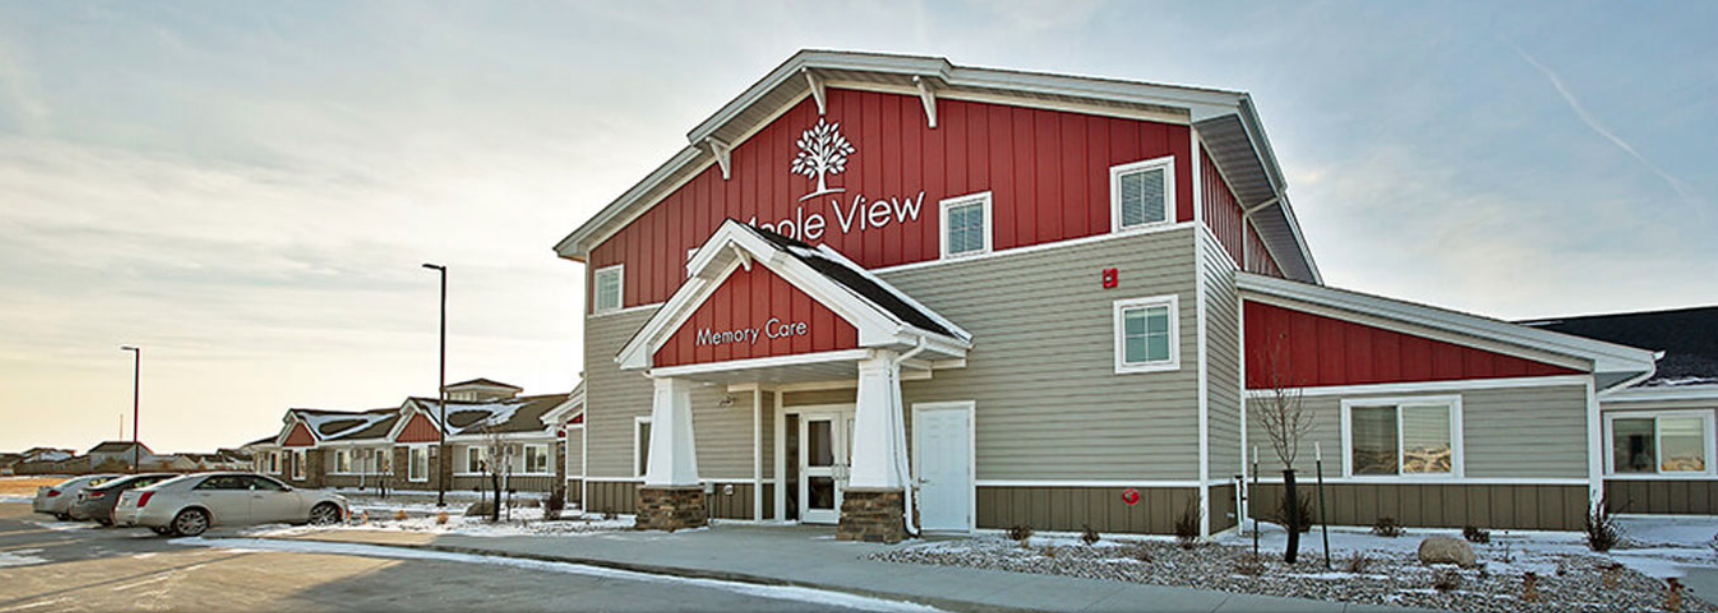 Maple View Memory Care image